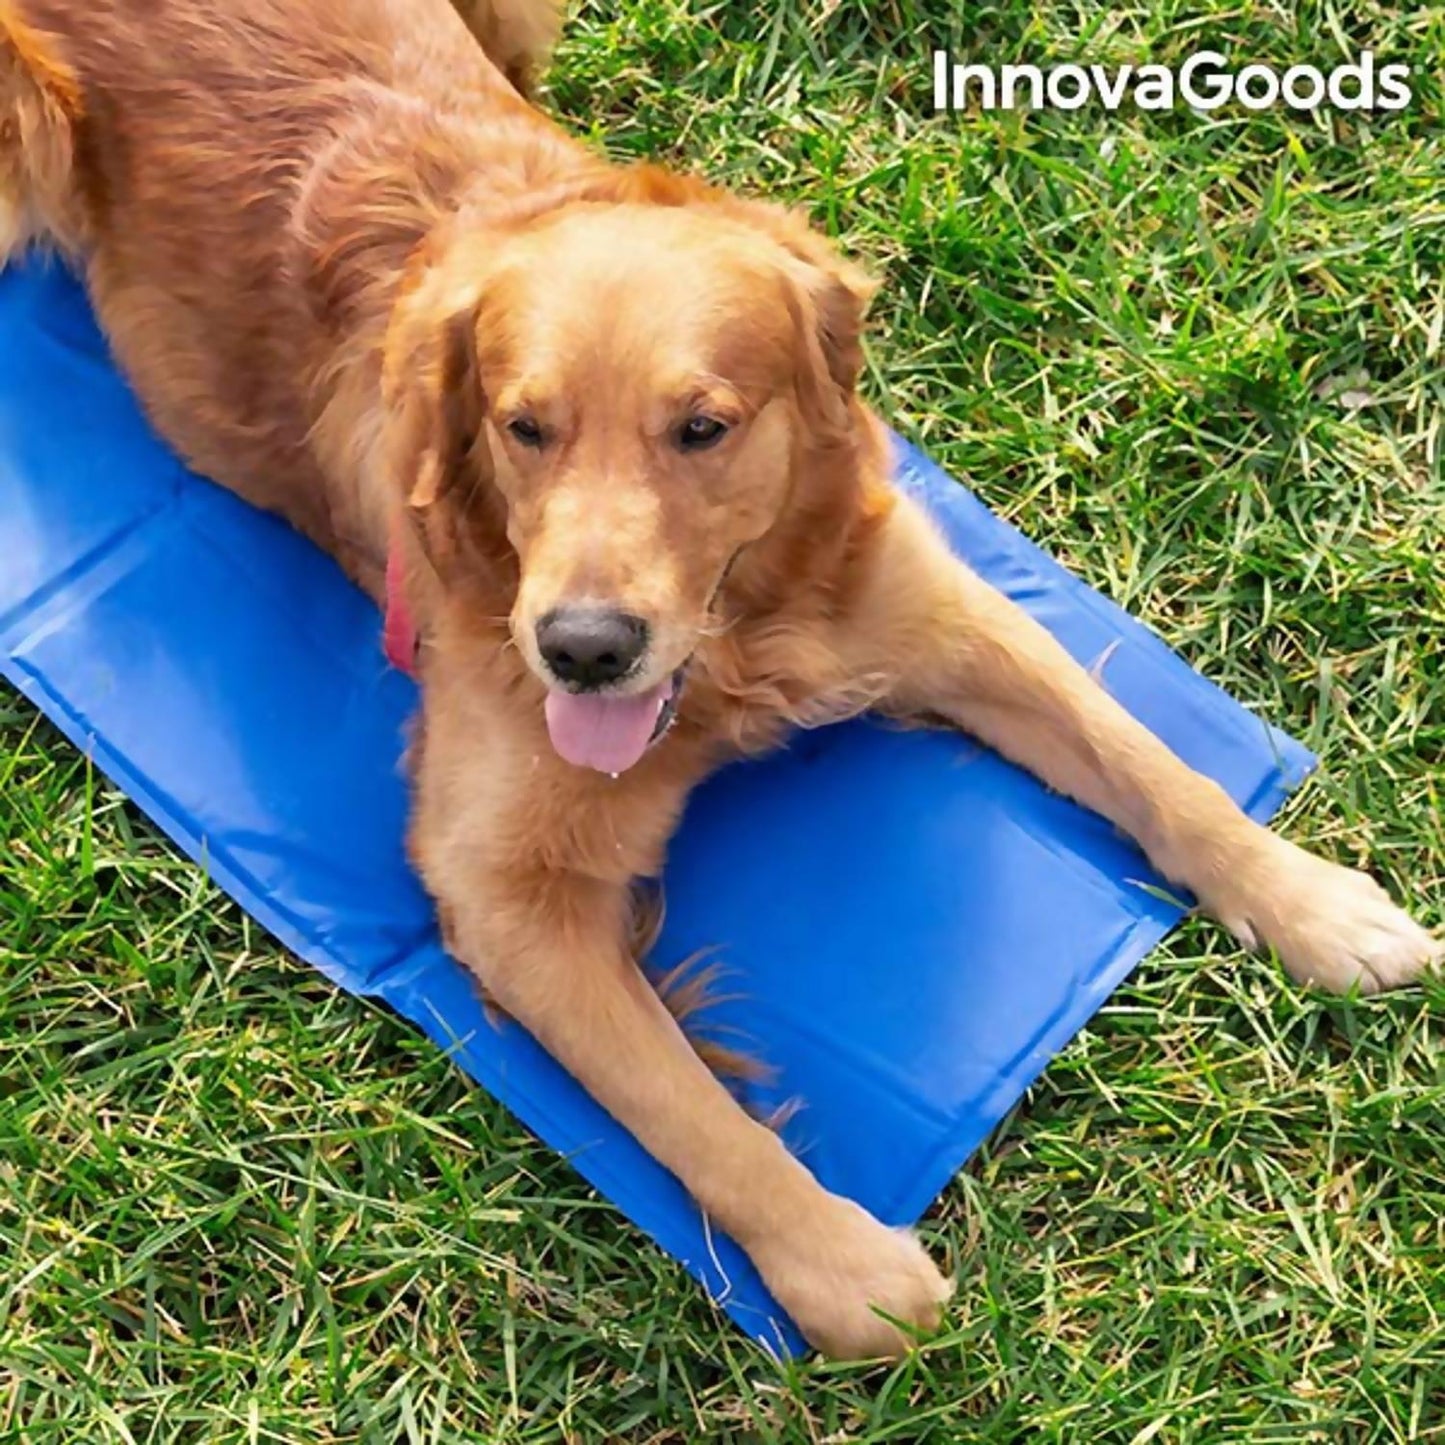 Soothe Your Pet With Cooling Gel For Relaxation And Comfort